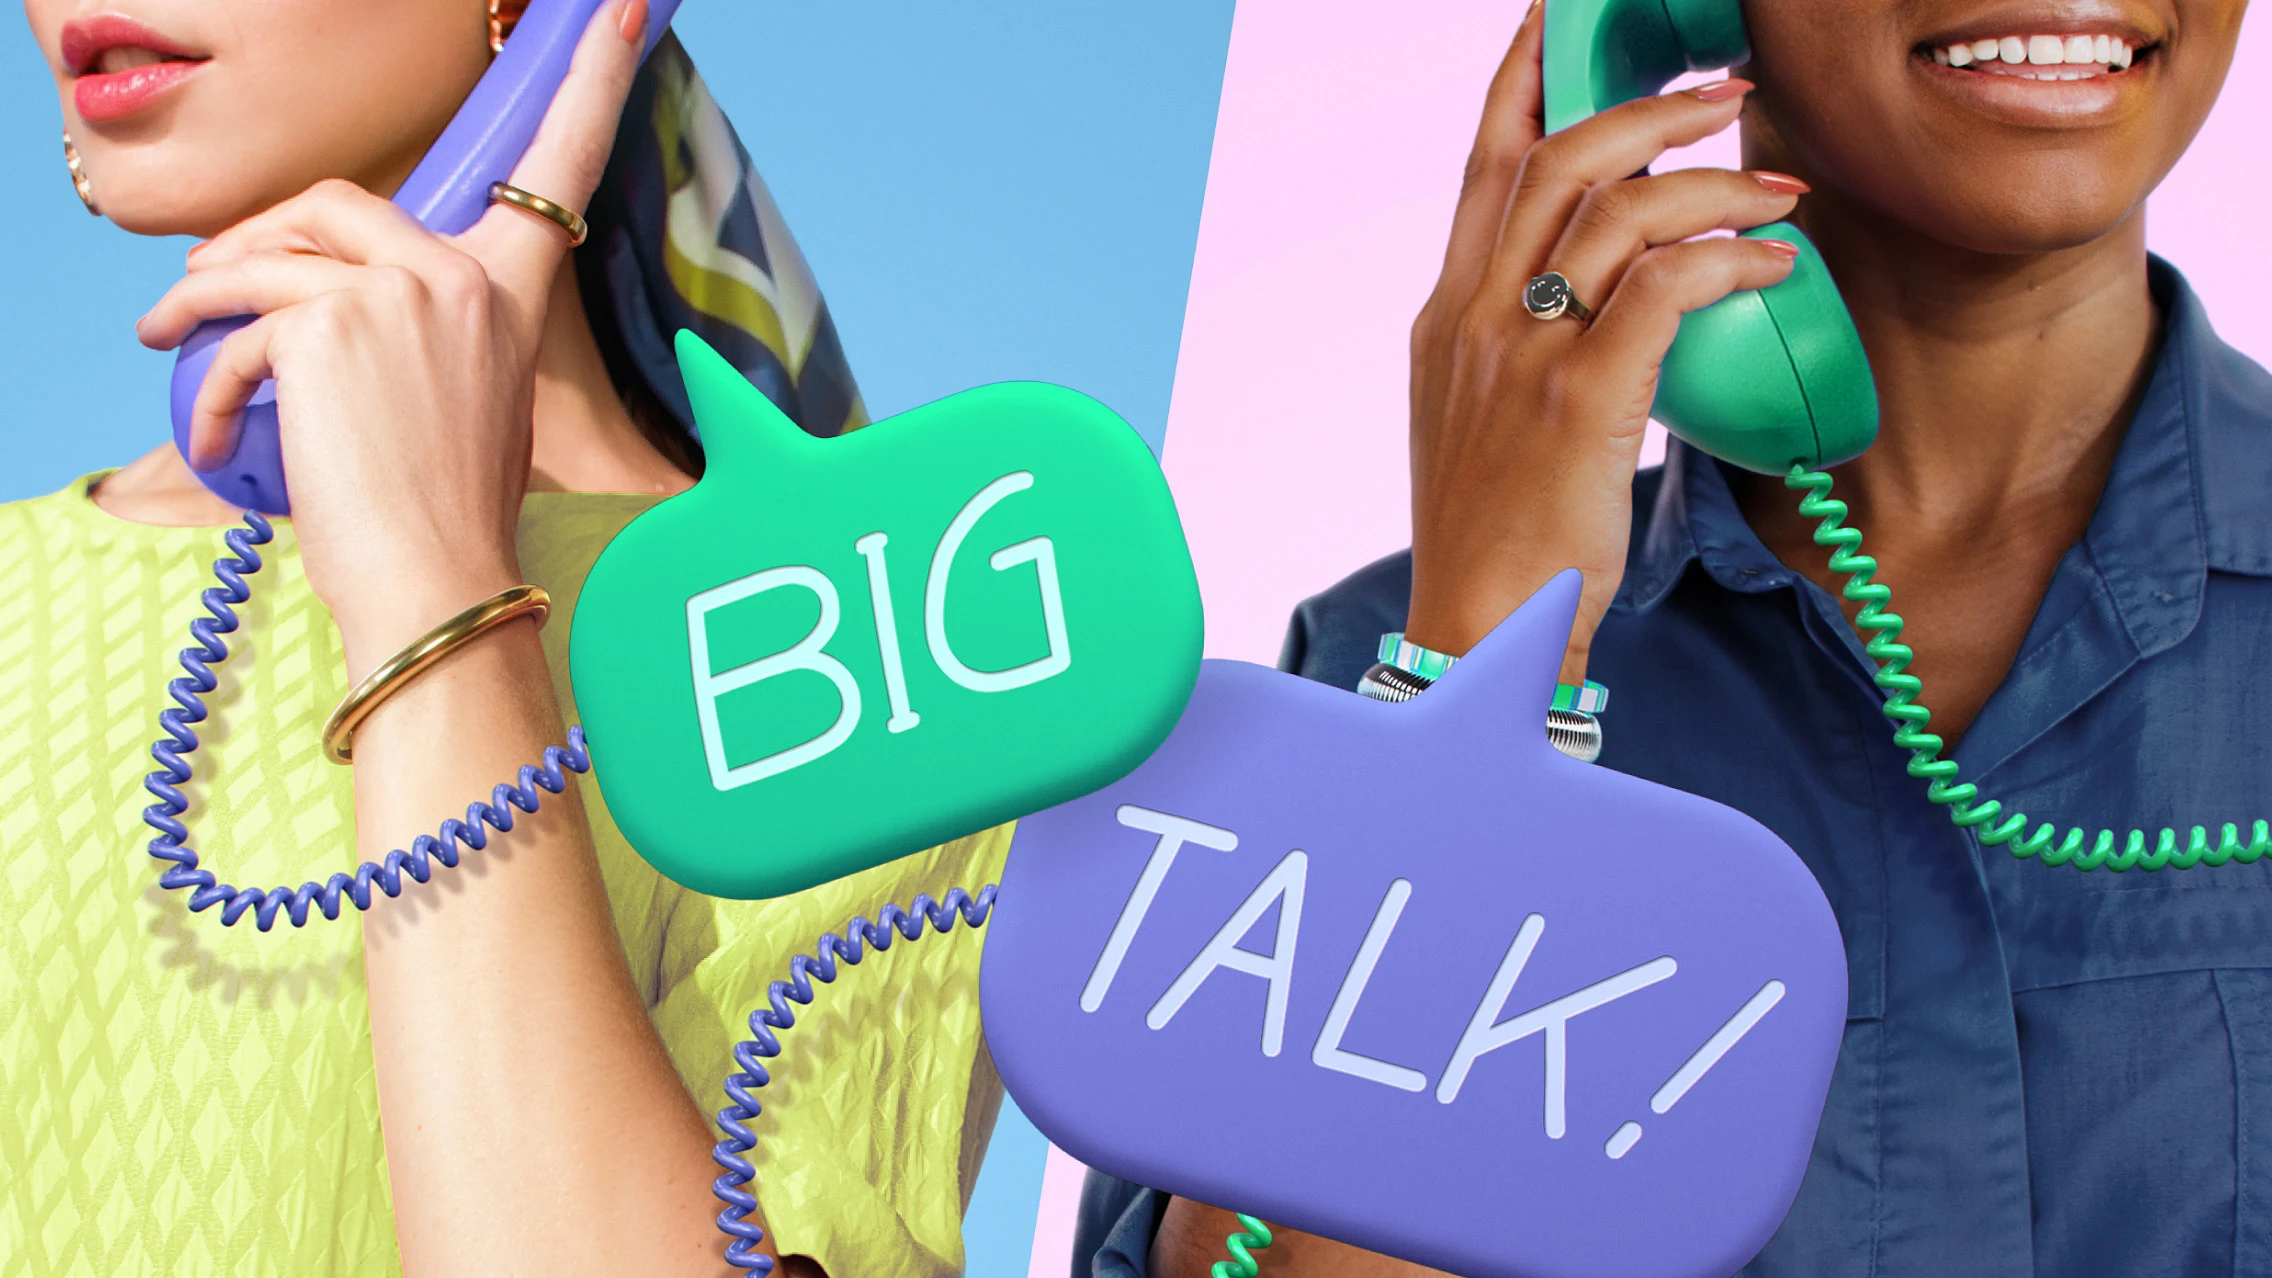 Close-up shot of White woman at left holding a purple phone with a chord in front of a blue background. Close-up shot of a Black woman at right holding a green phone in front of a pink background. “Big talk” is written in speech bubbles.